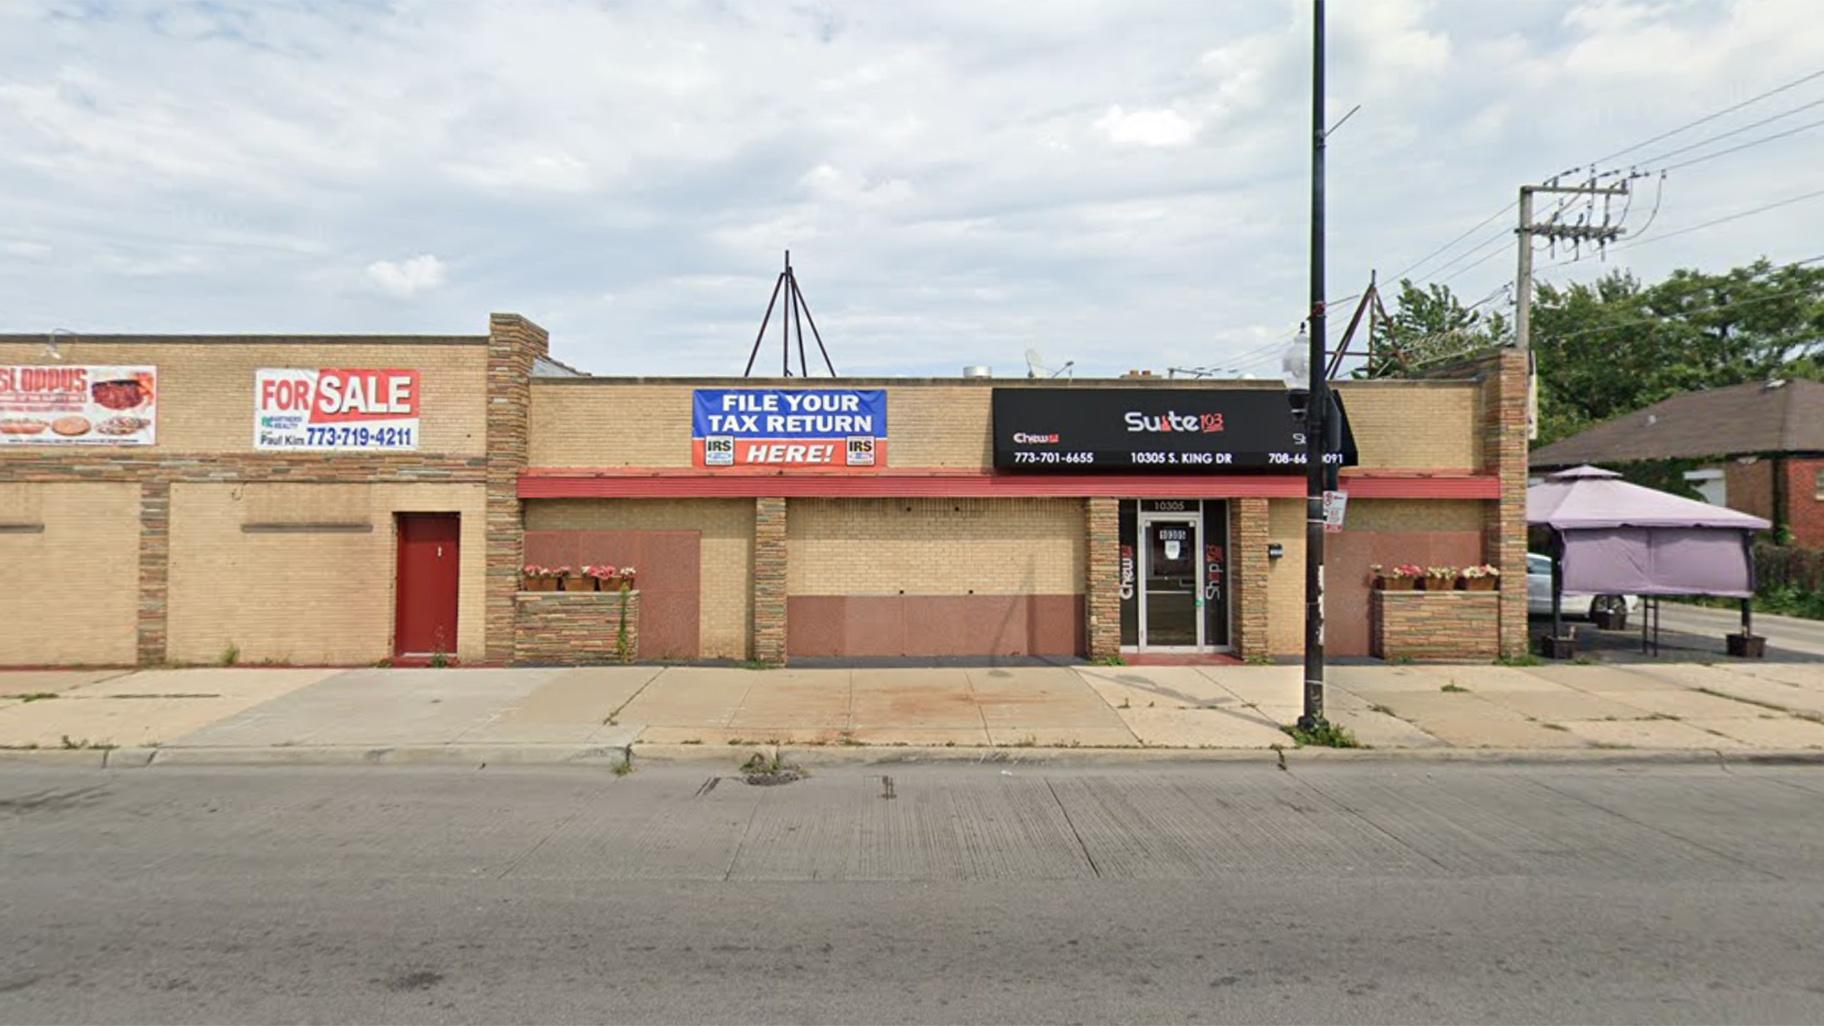 A Google Street View of the building at 10305 S. Martin Luther King Drive, dated July 2019. (WTTW News via Google Maps)